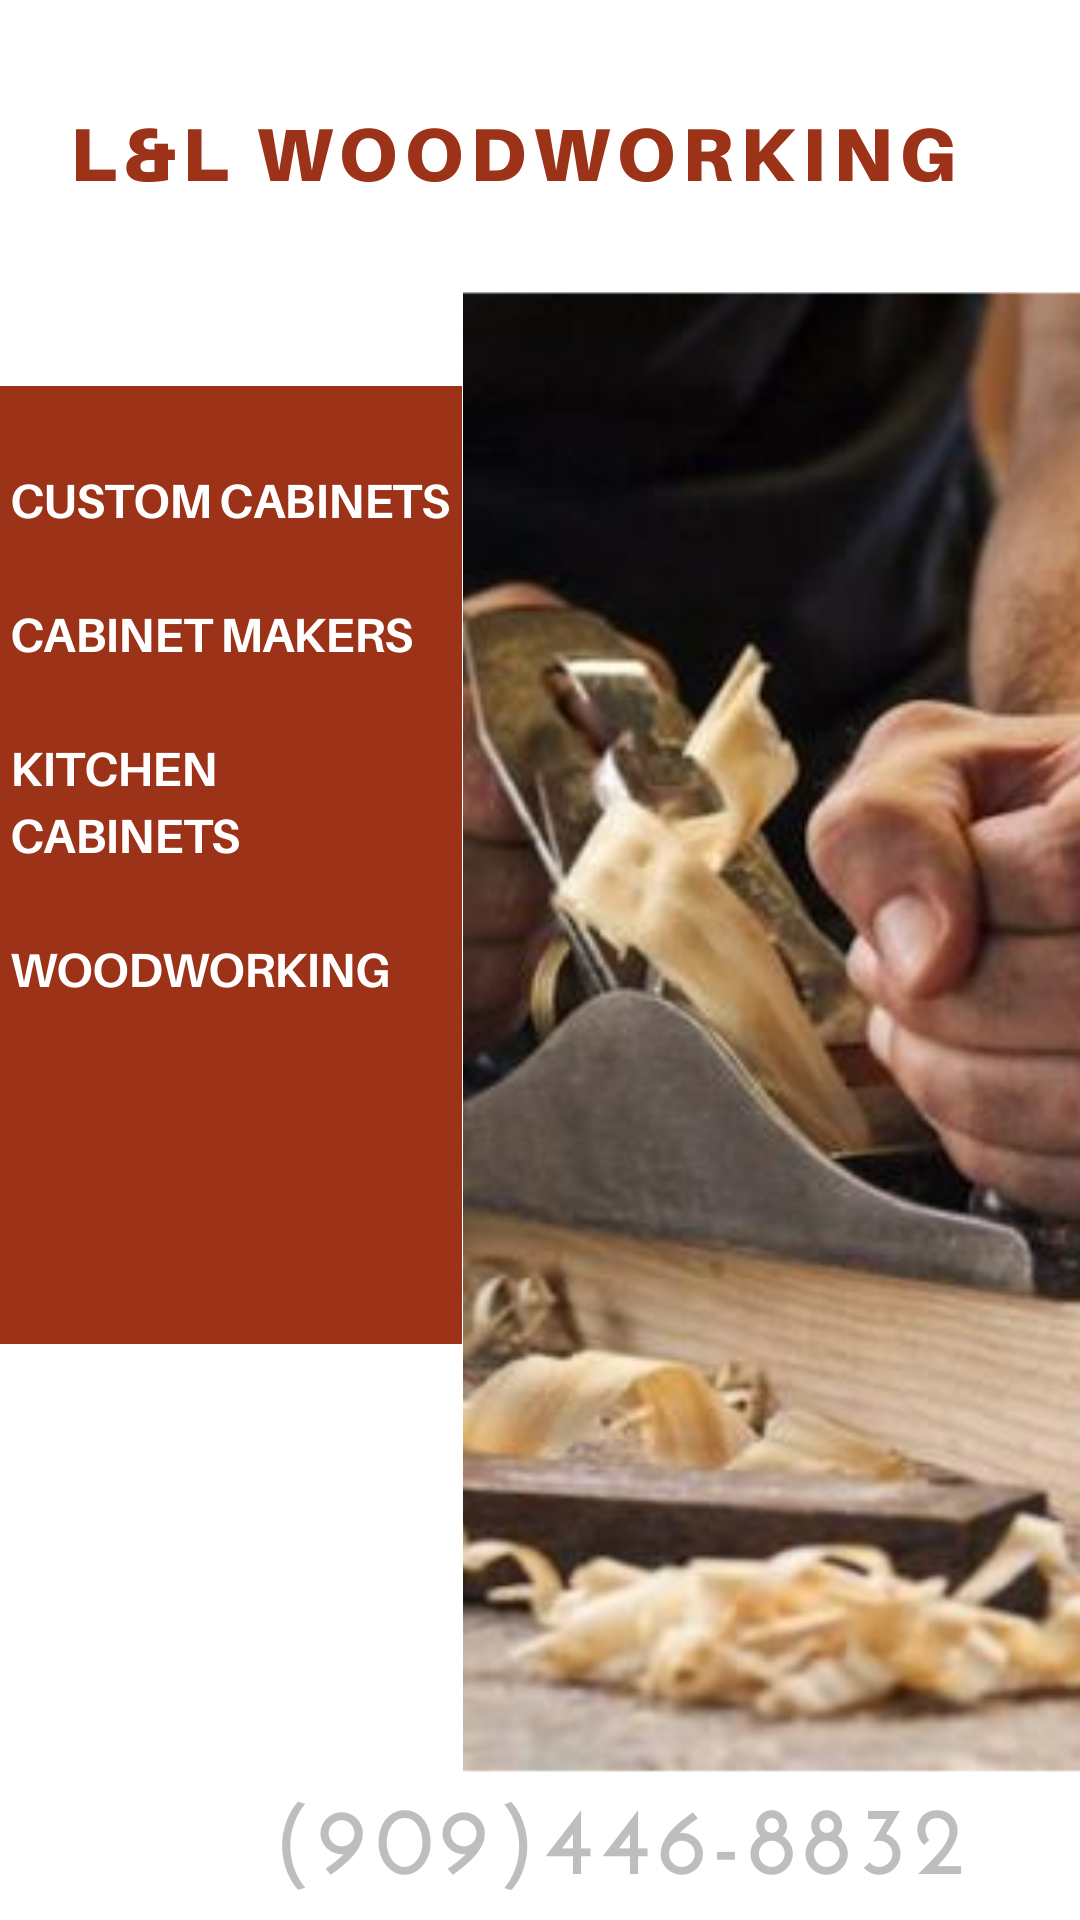 Custom cabinets, cabinet makers, kitchen cabinets, woodworking